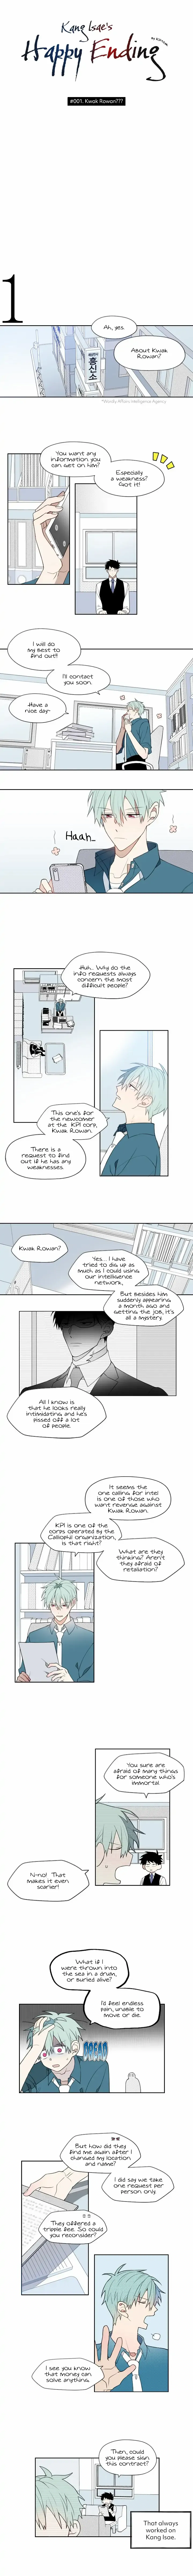 Kang Isae's Happy Ending Chapter 1 - Picture 3